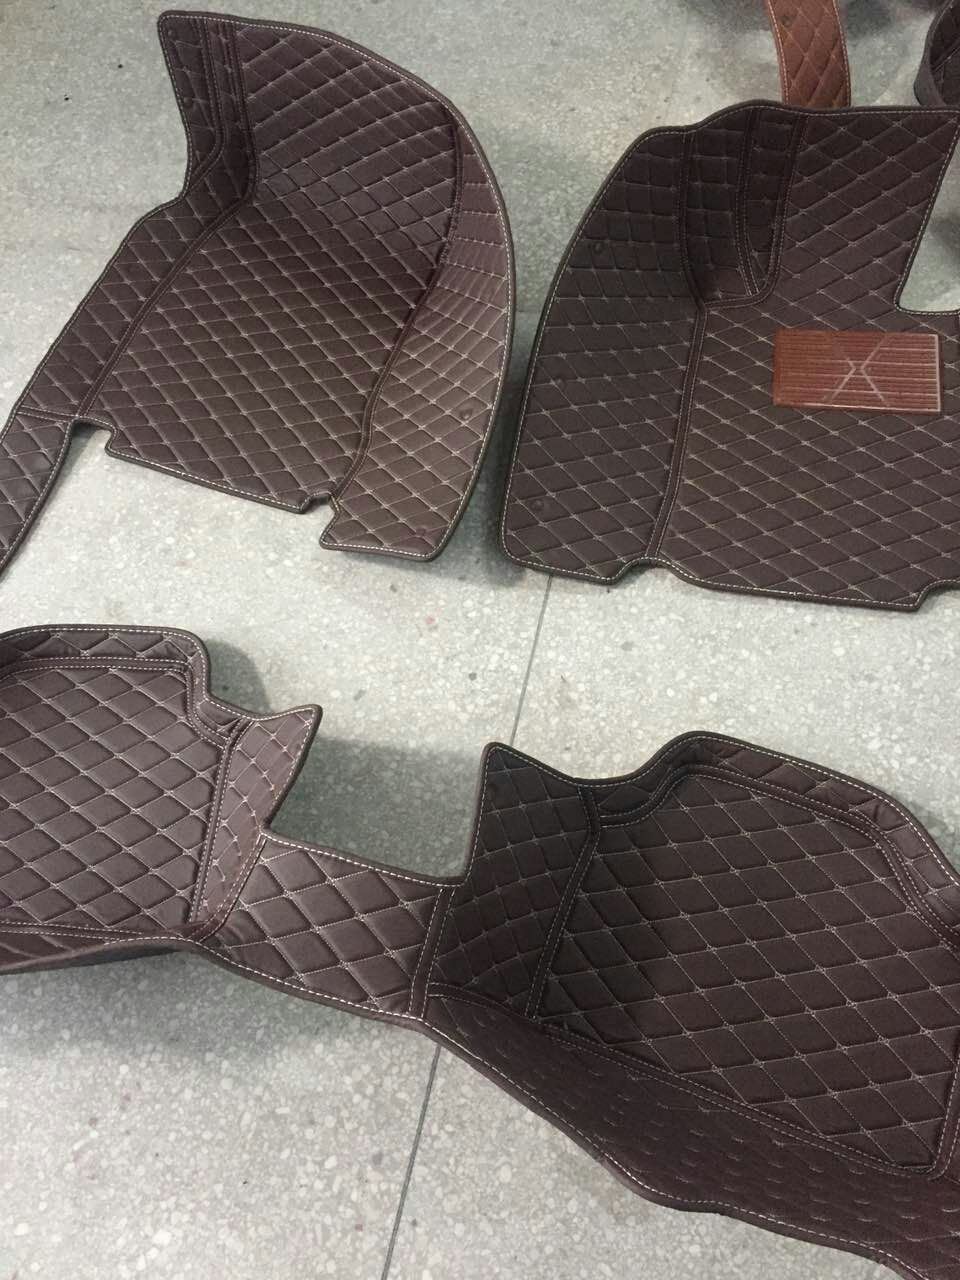 Leather 5D Car Mats for Audi/Honda Right Hand Driver Car